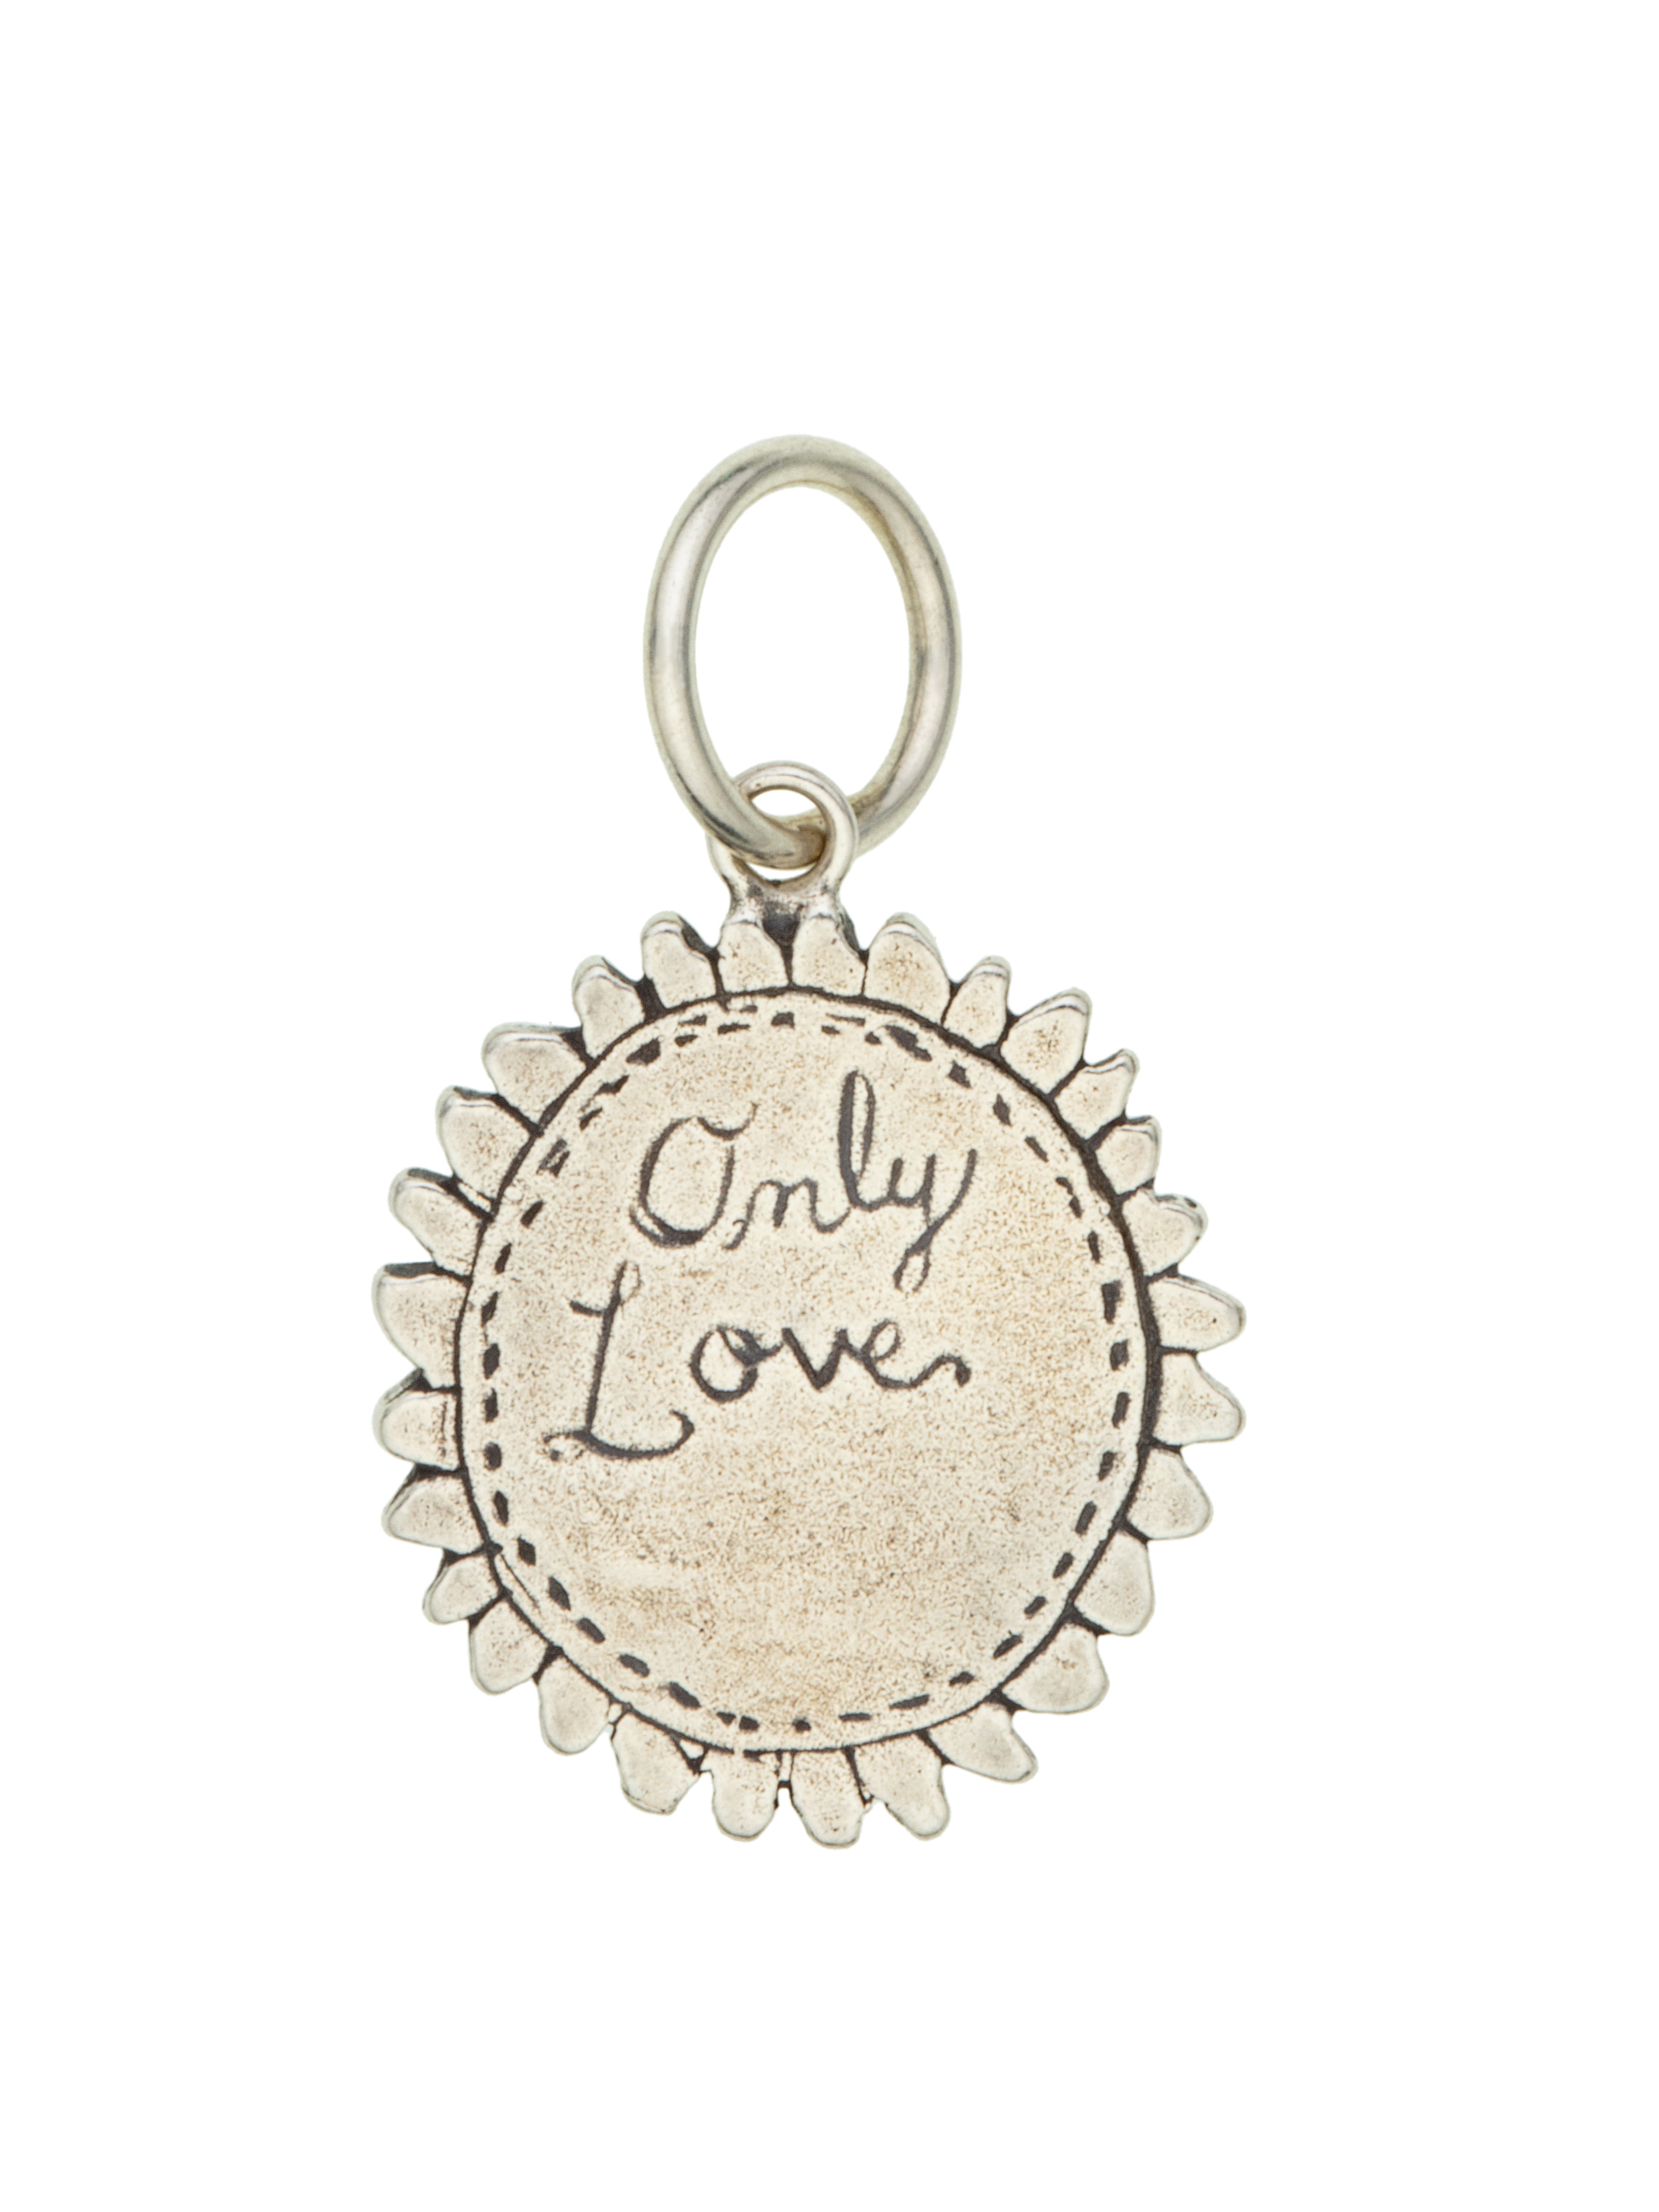 Only Love Charm